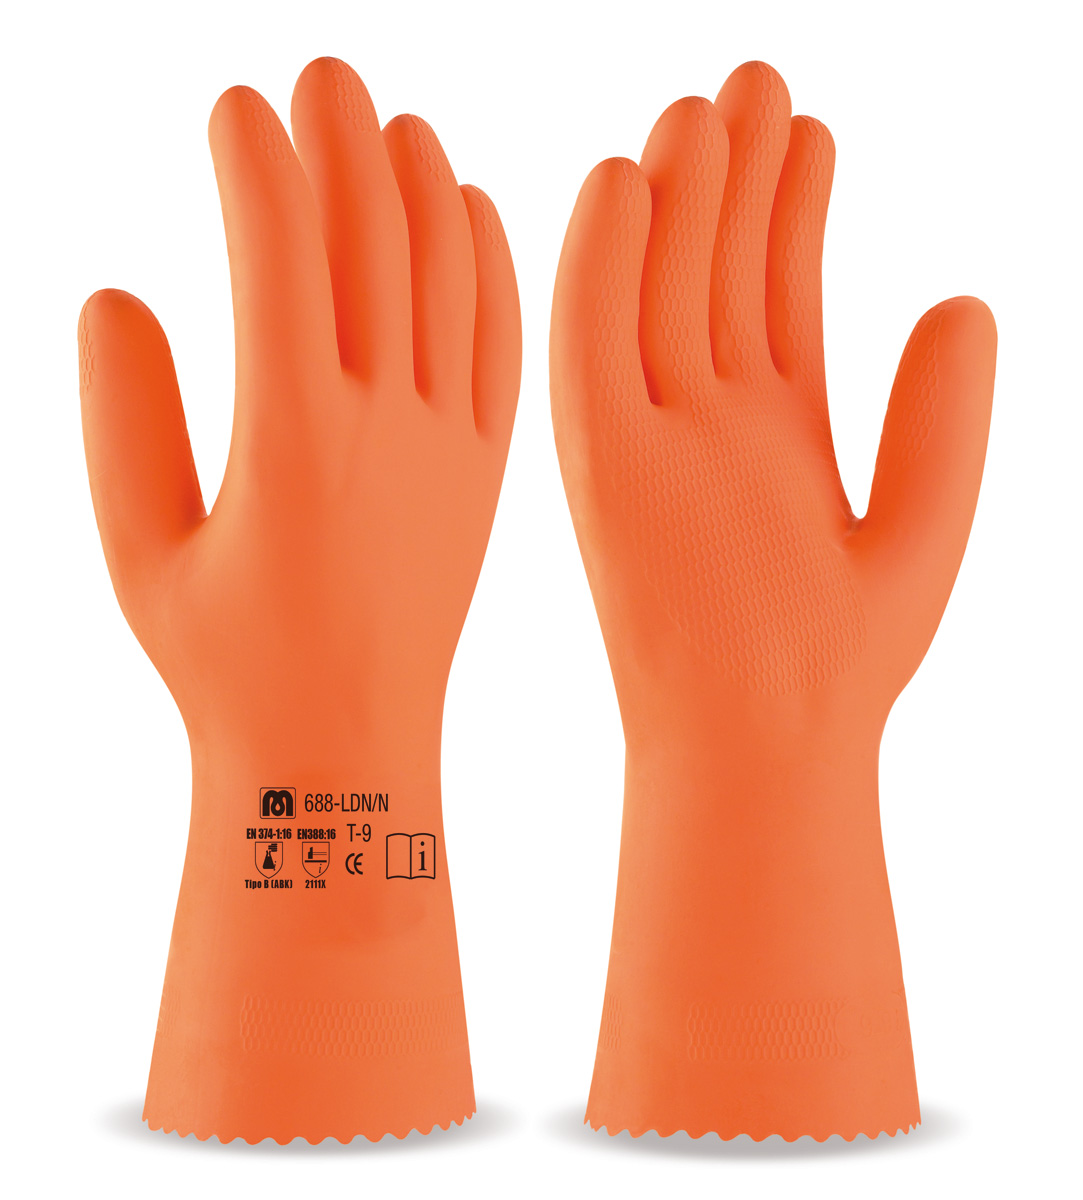 688-LDA/N Work Gloves Latex without support Blue latex domestic glove for chemical hazards and micro-organisms.